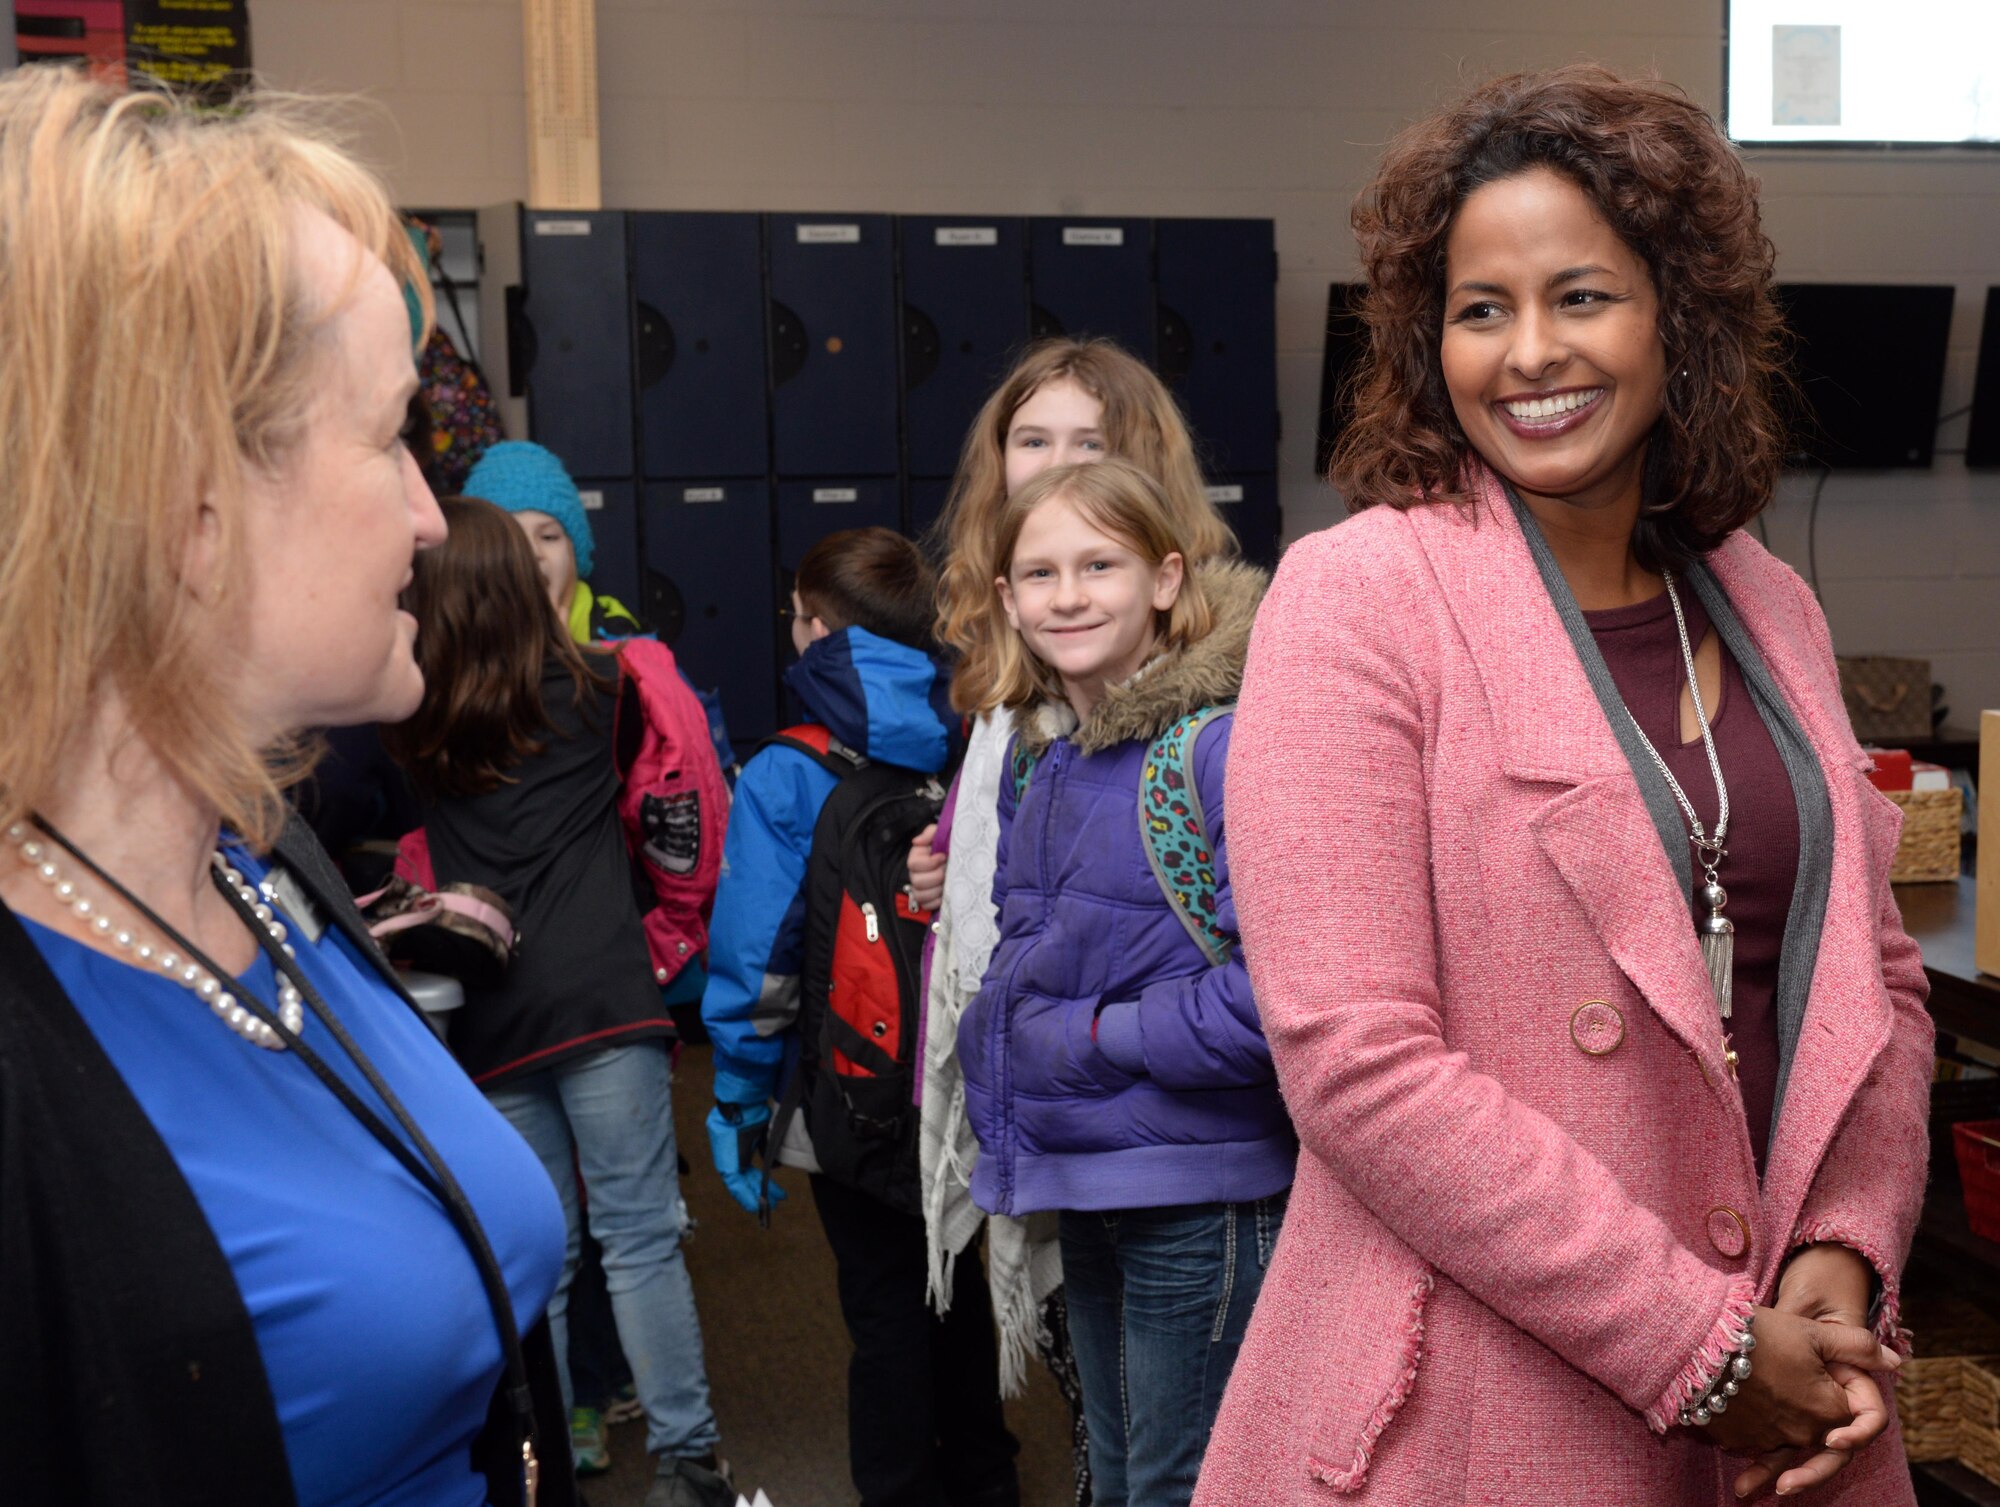 Amy Clark, spouse of Maj. Gen. Richard Clark, Eighth Air Force commander, meets with Fran Apland, 28th Force Support Squadron Youth Program director, in the Youth Center at Ellsworth Air Force Base, S.D., Jan. 19, 2016. Clark received a tour of the teen center as well as various areas of the Youth Center’s programs, such as the Science, Technology, Engineering, Arts and Mathematics initiative. (U.S. Air Force photo by Airman Donald C. Knechtel/Released)